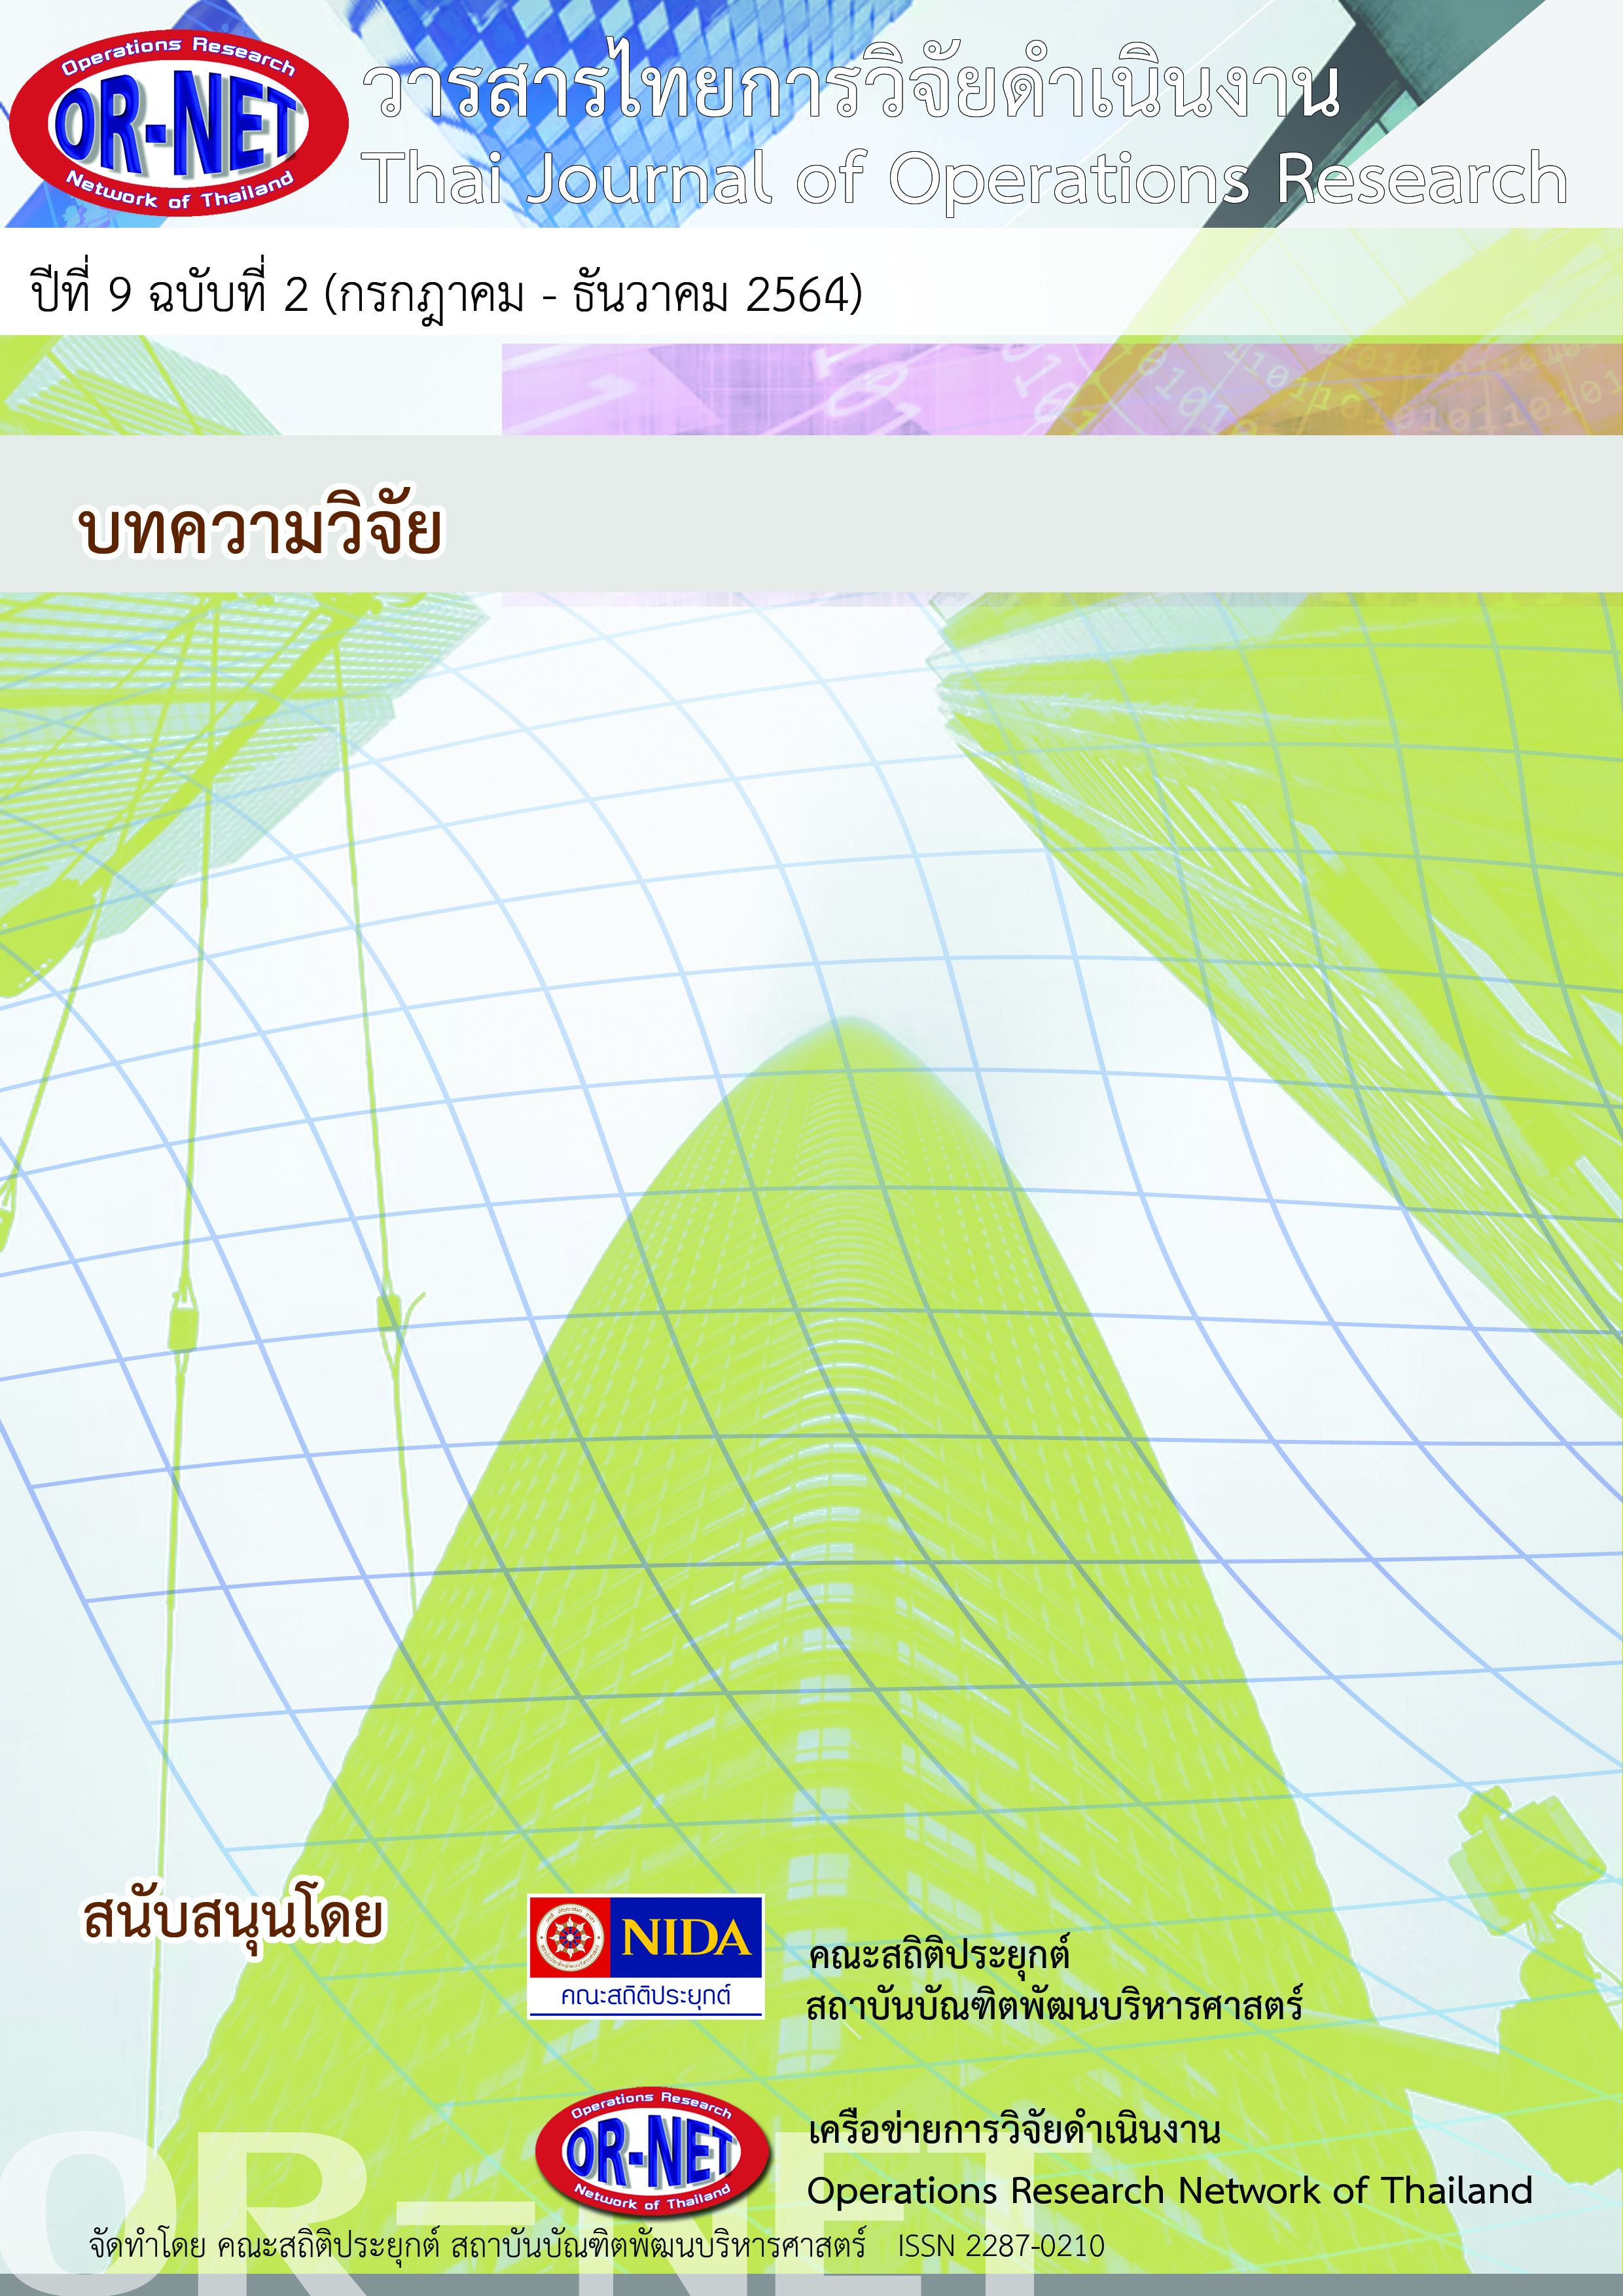 					View Vol. 9 No. 2 (2021): Thai Journal of Operations Research: TJOR Vol 9 No 2 (July - December 2021)
				